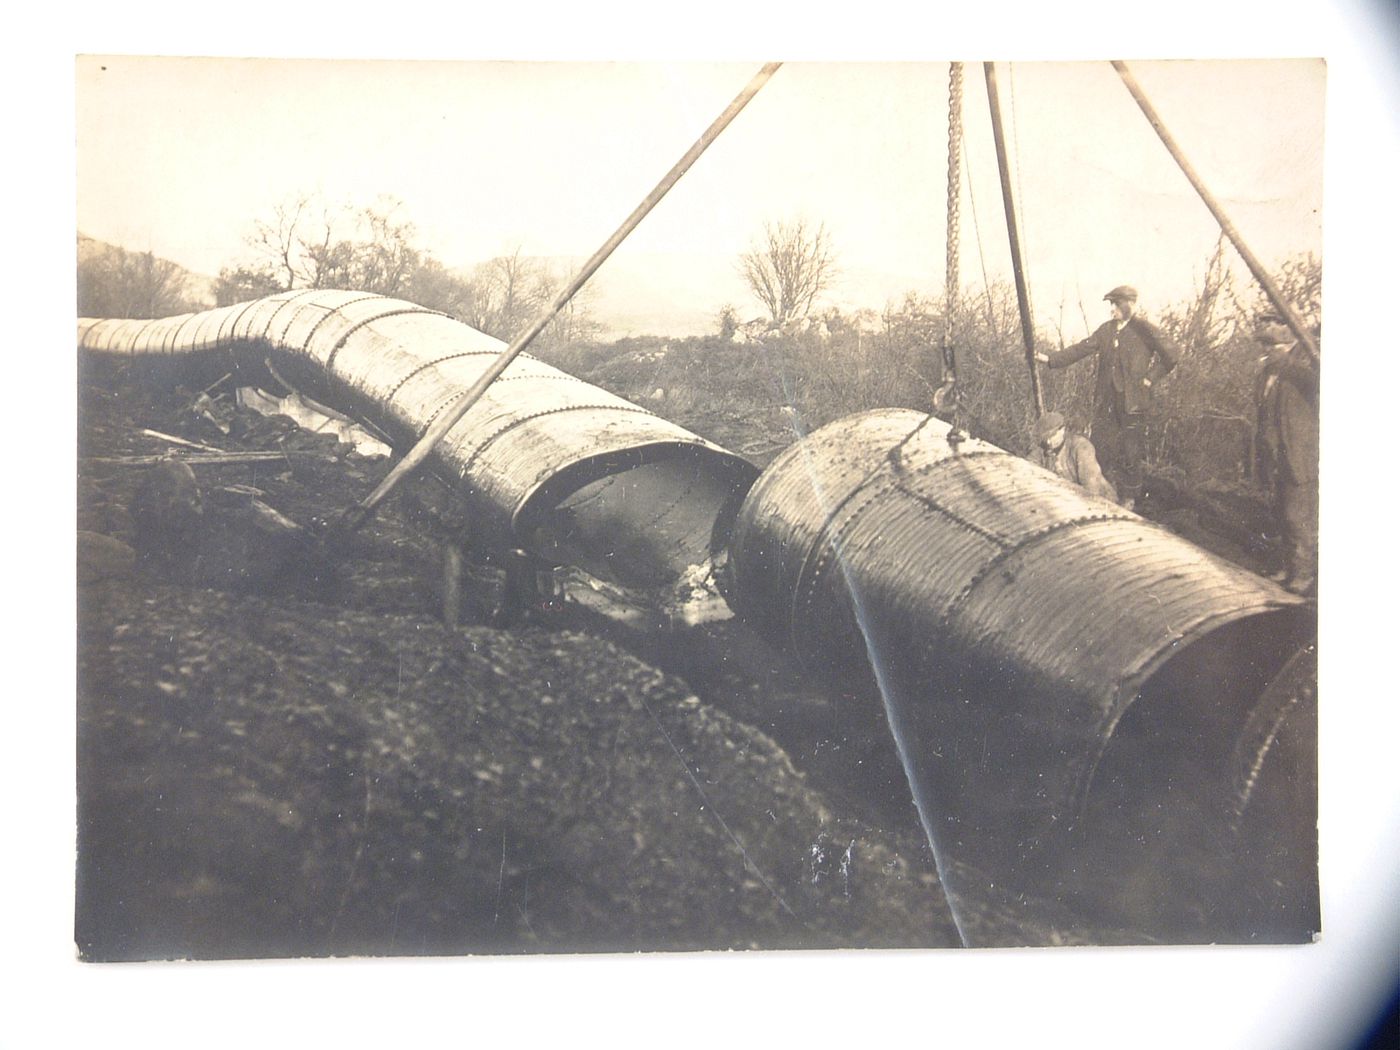 View of installation of large riveted pipeline, unknown location